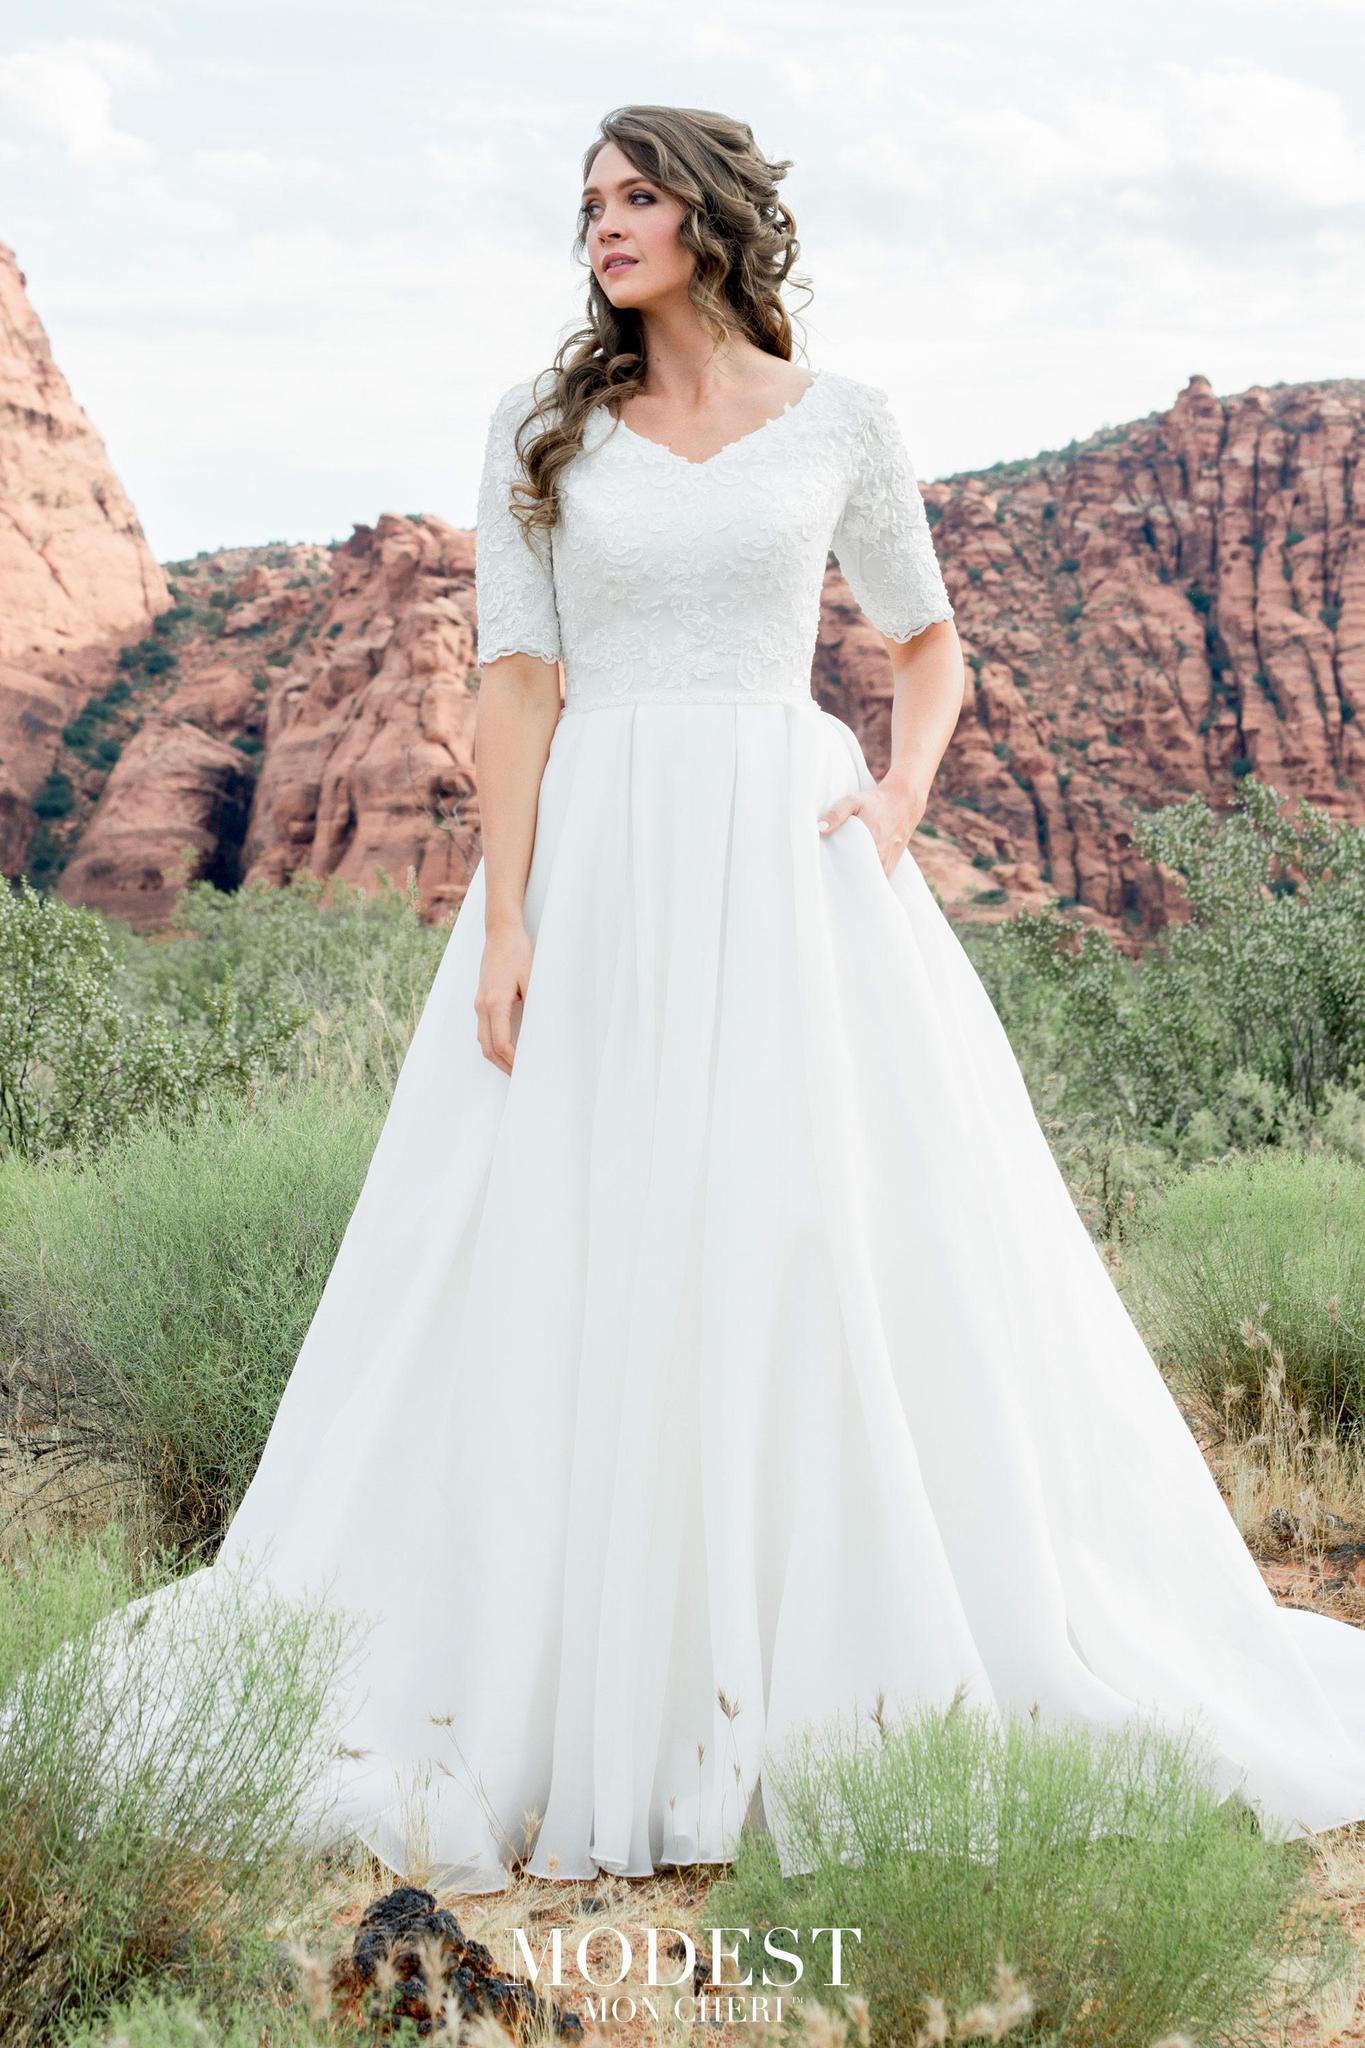 Plus Size Modest Wedding Dresses Best 10 Find The Perfect Venue For Your Special Wedding Day